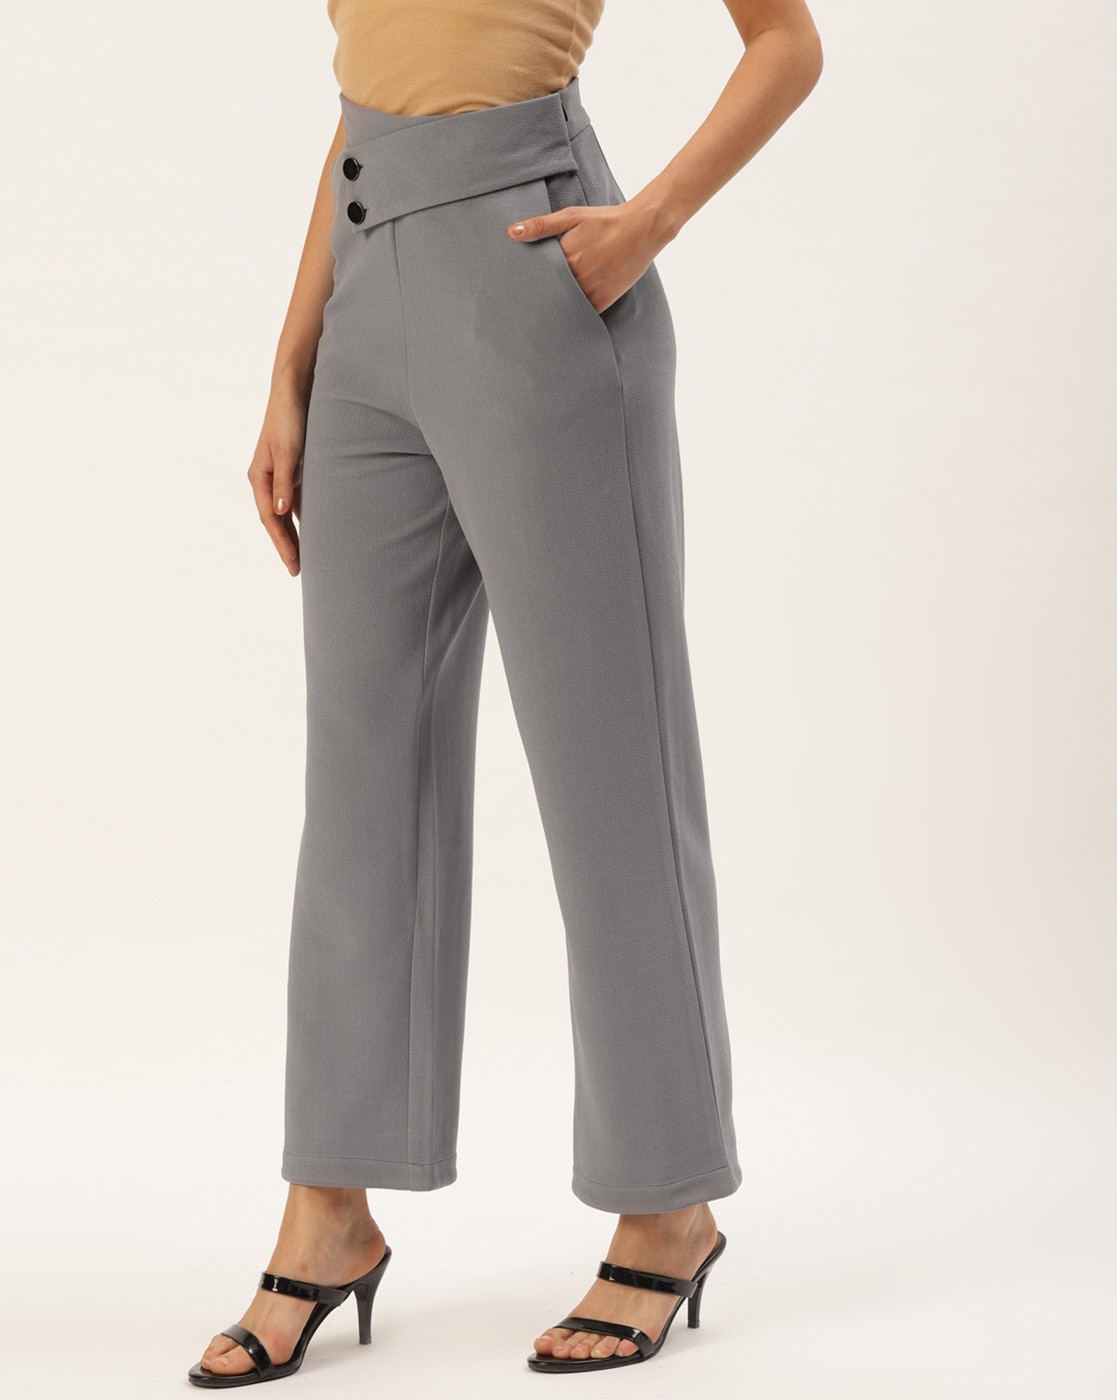 Allen Solly Grey Trousers for Women  Fashions Mantra